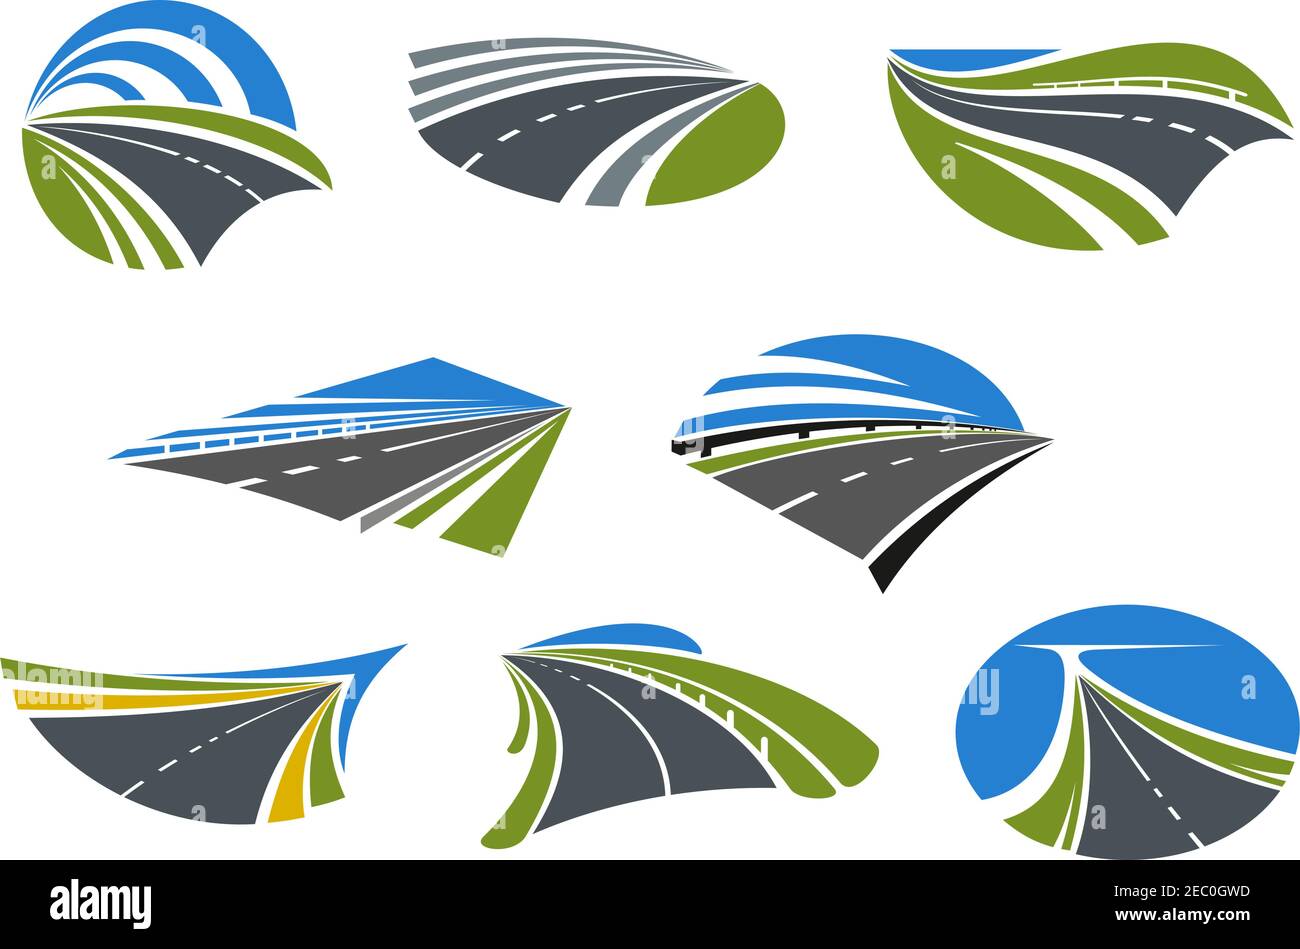 Roads and modern speed highways icons with green and yellow roadsides and blue sky. For travel, vacation or transportation design Stock Vector